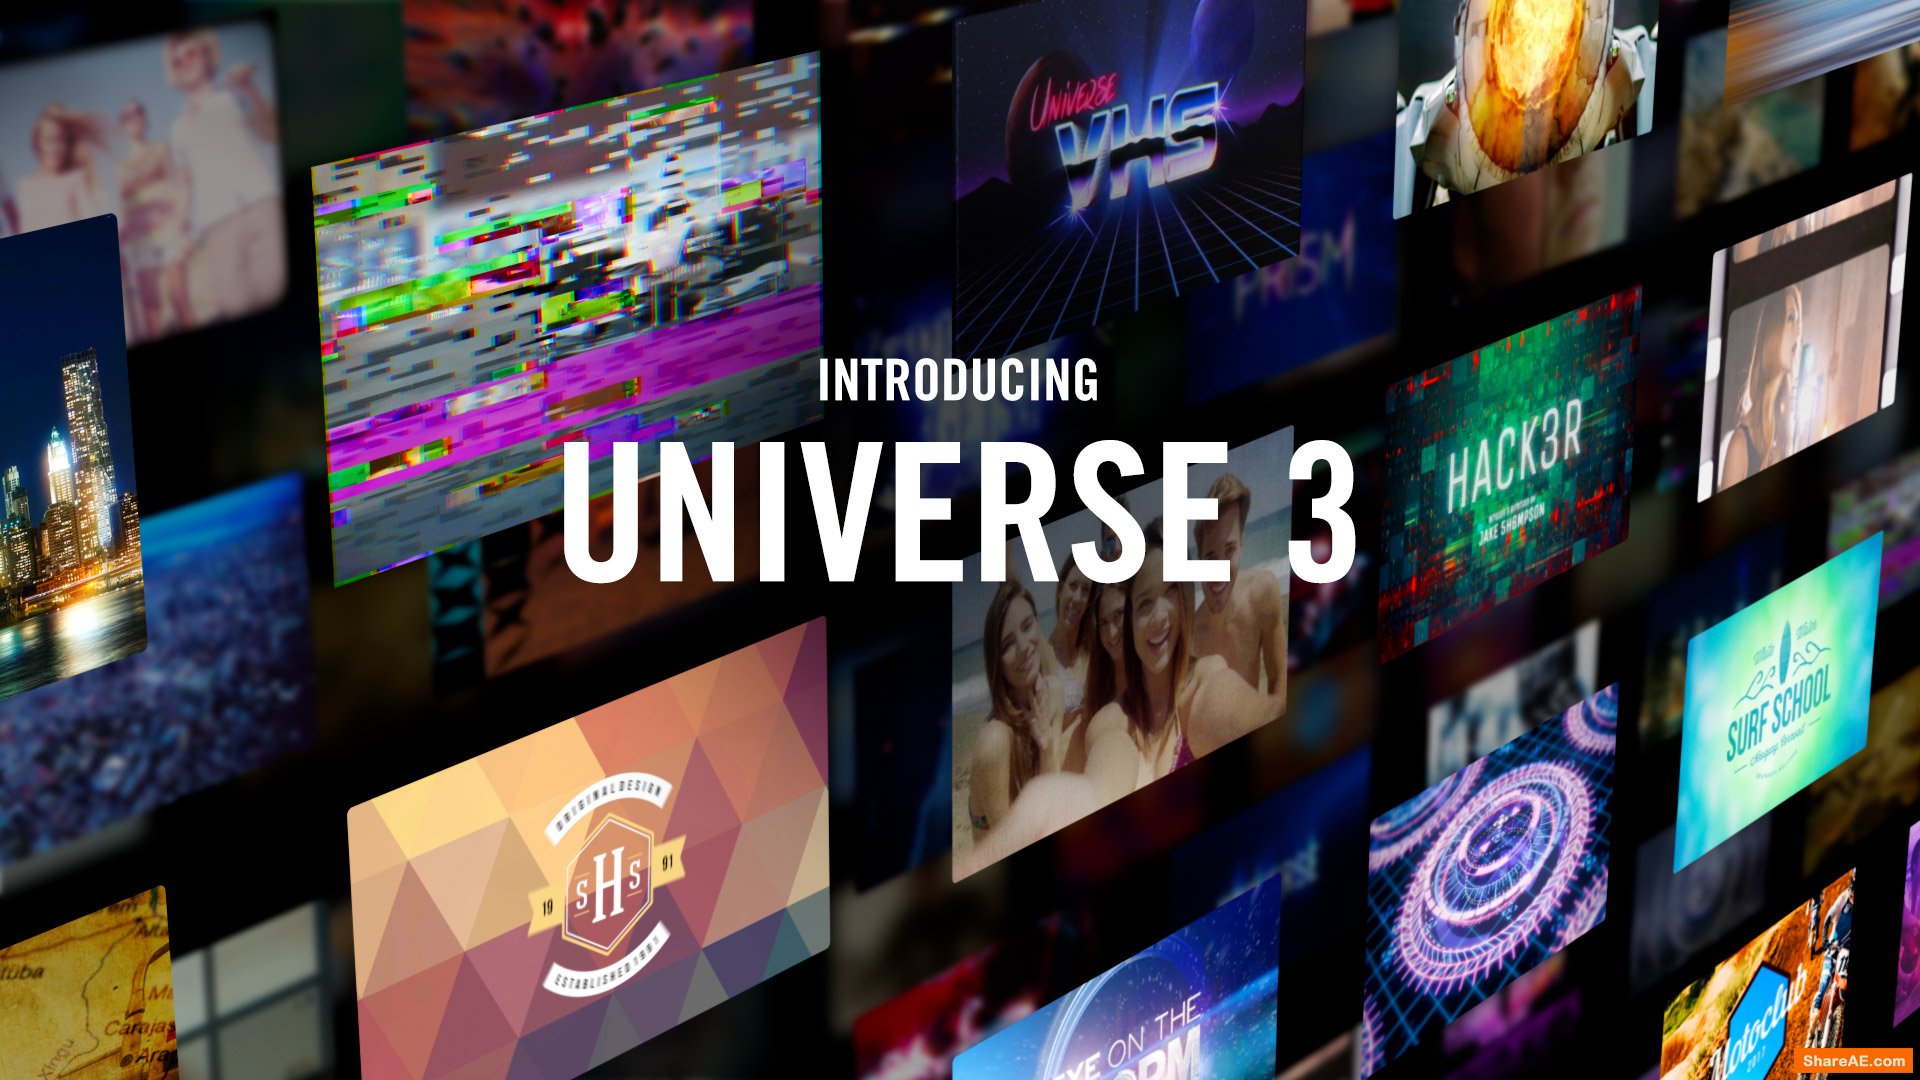 Red Giant Universe 3.0.2 [Full] For After Effects & Premiere Pro